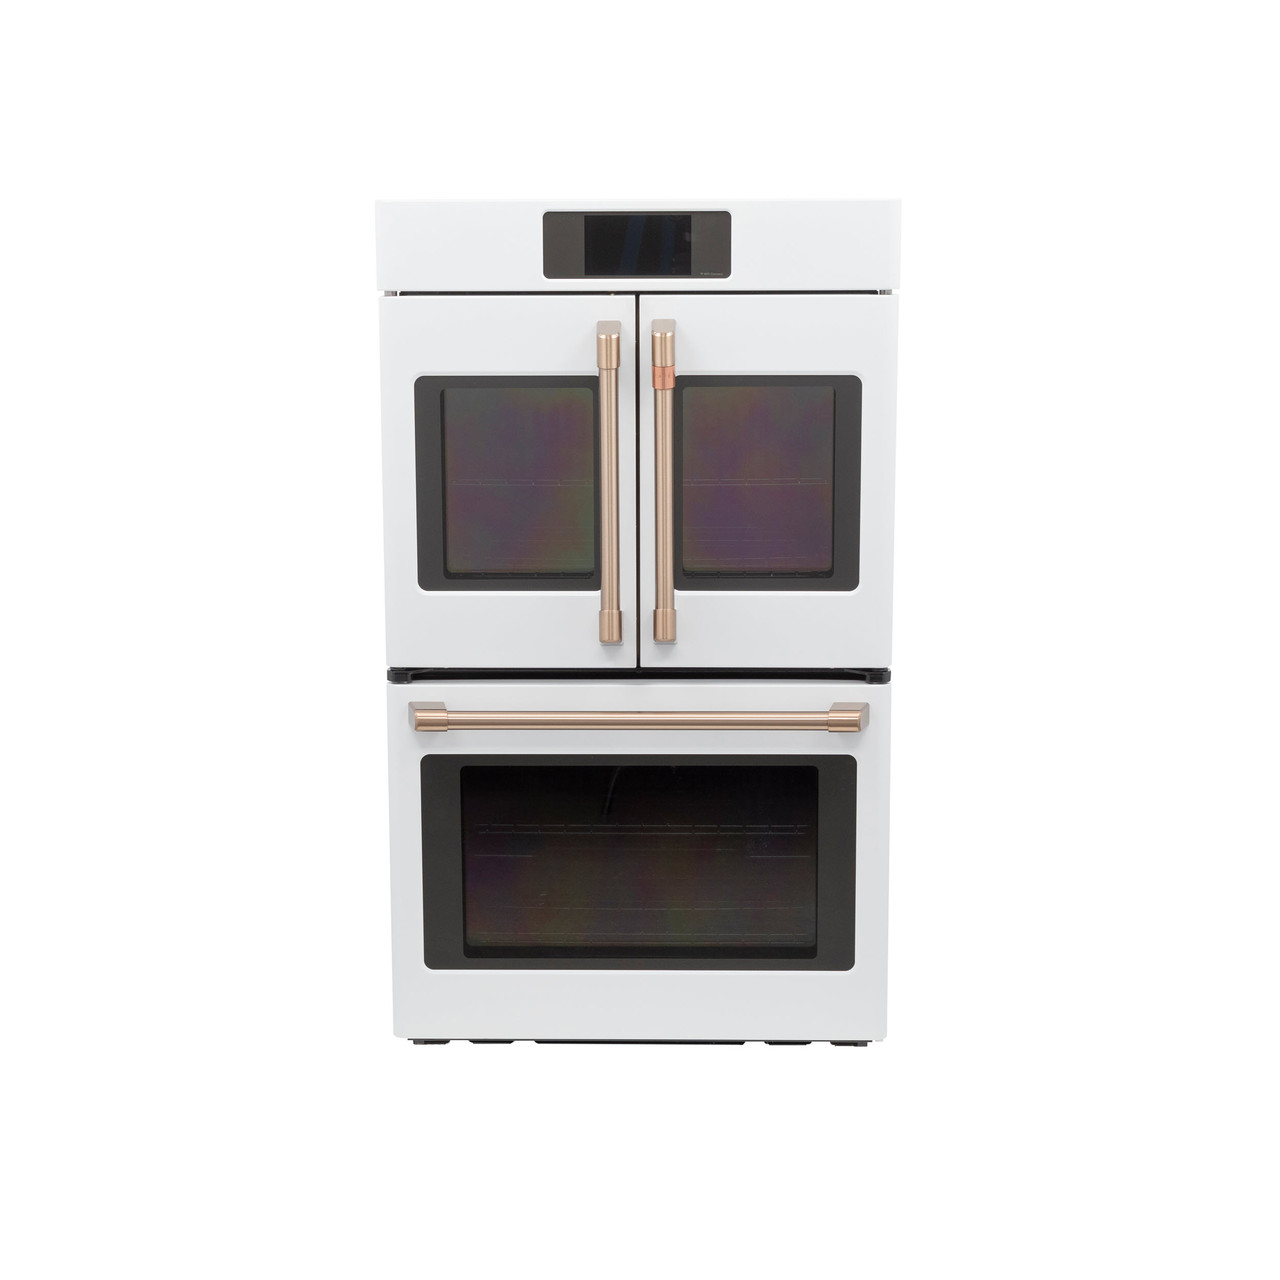 Cafe Professional Series 30 Smart Built-in Convection French-Door Double Wall Oven Stainless Steel